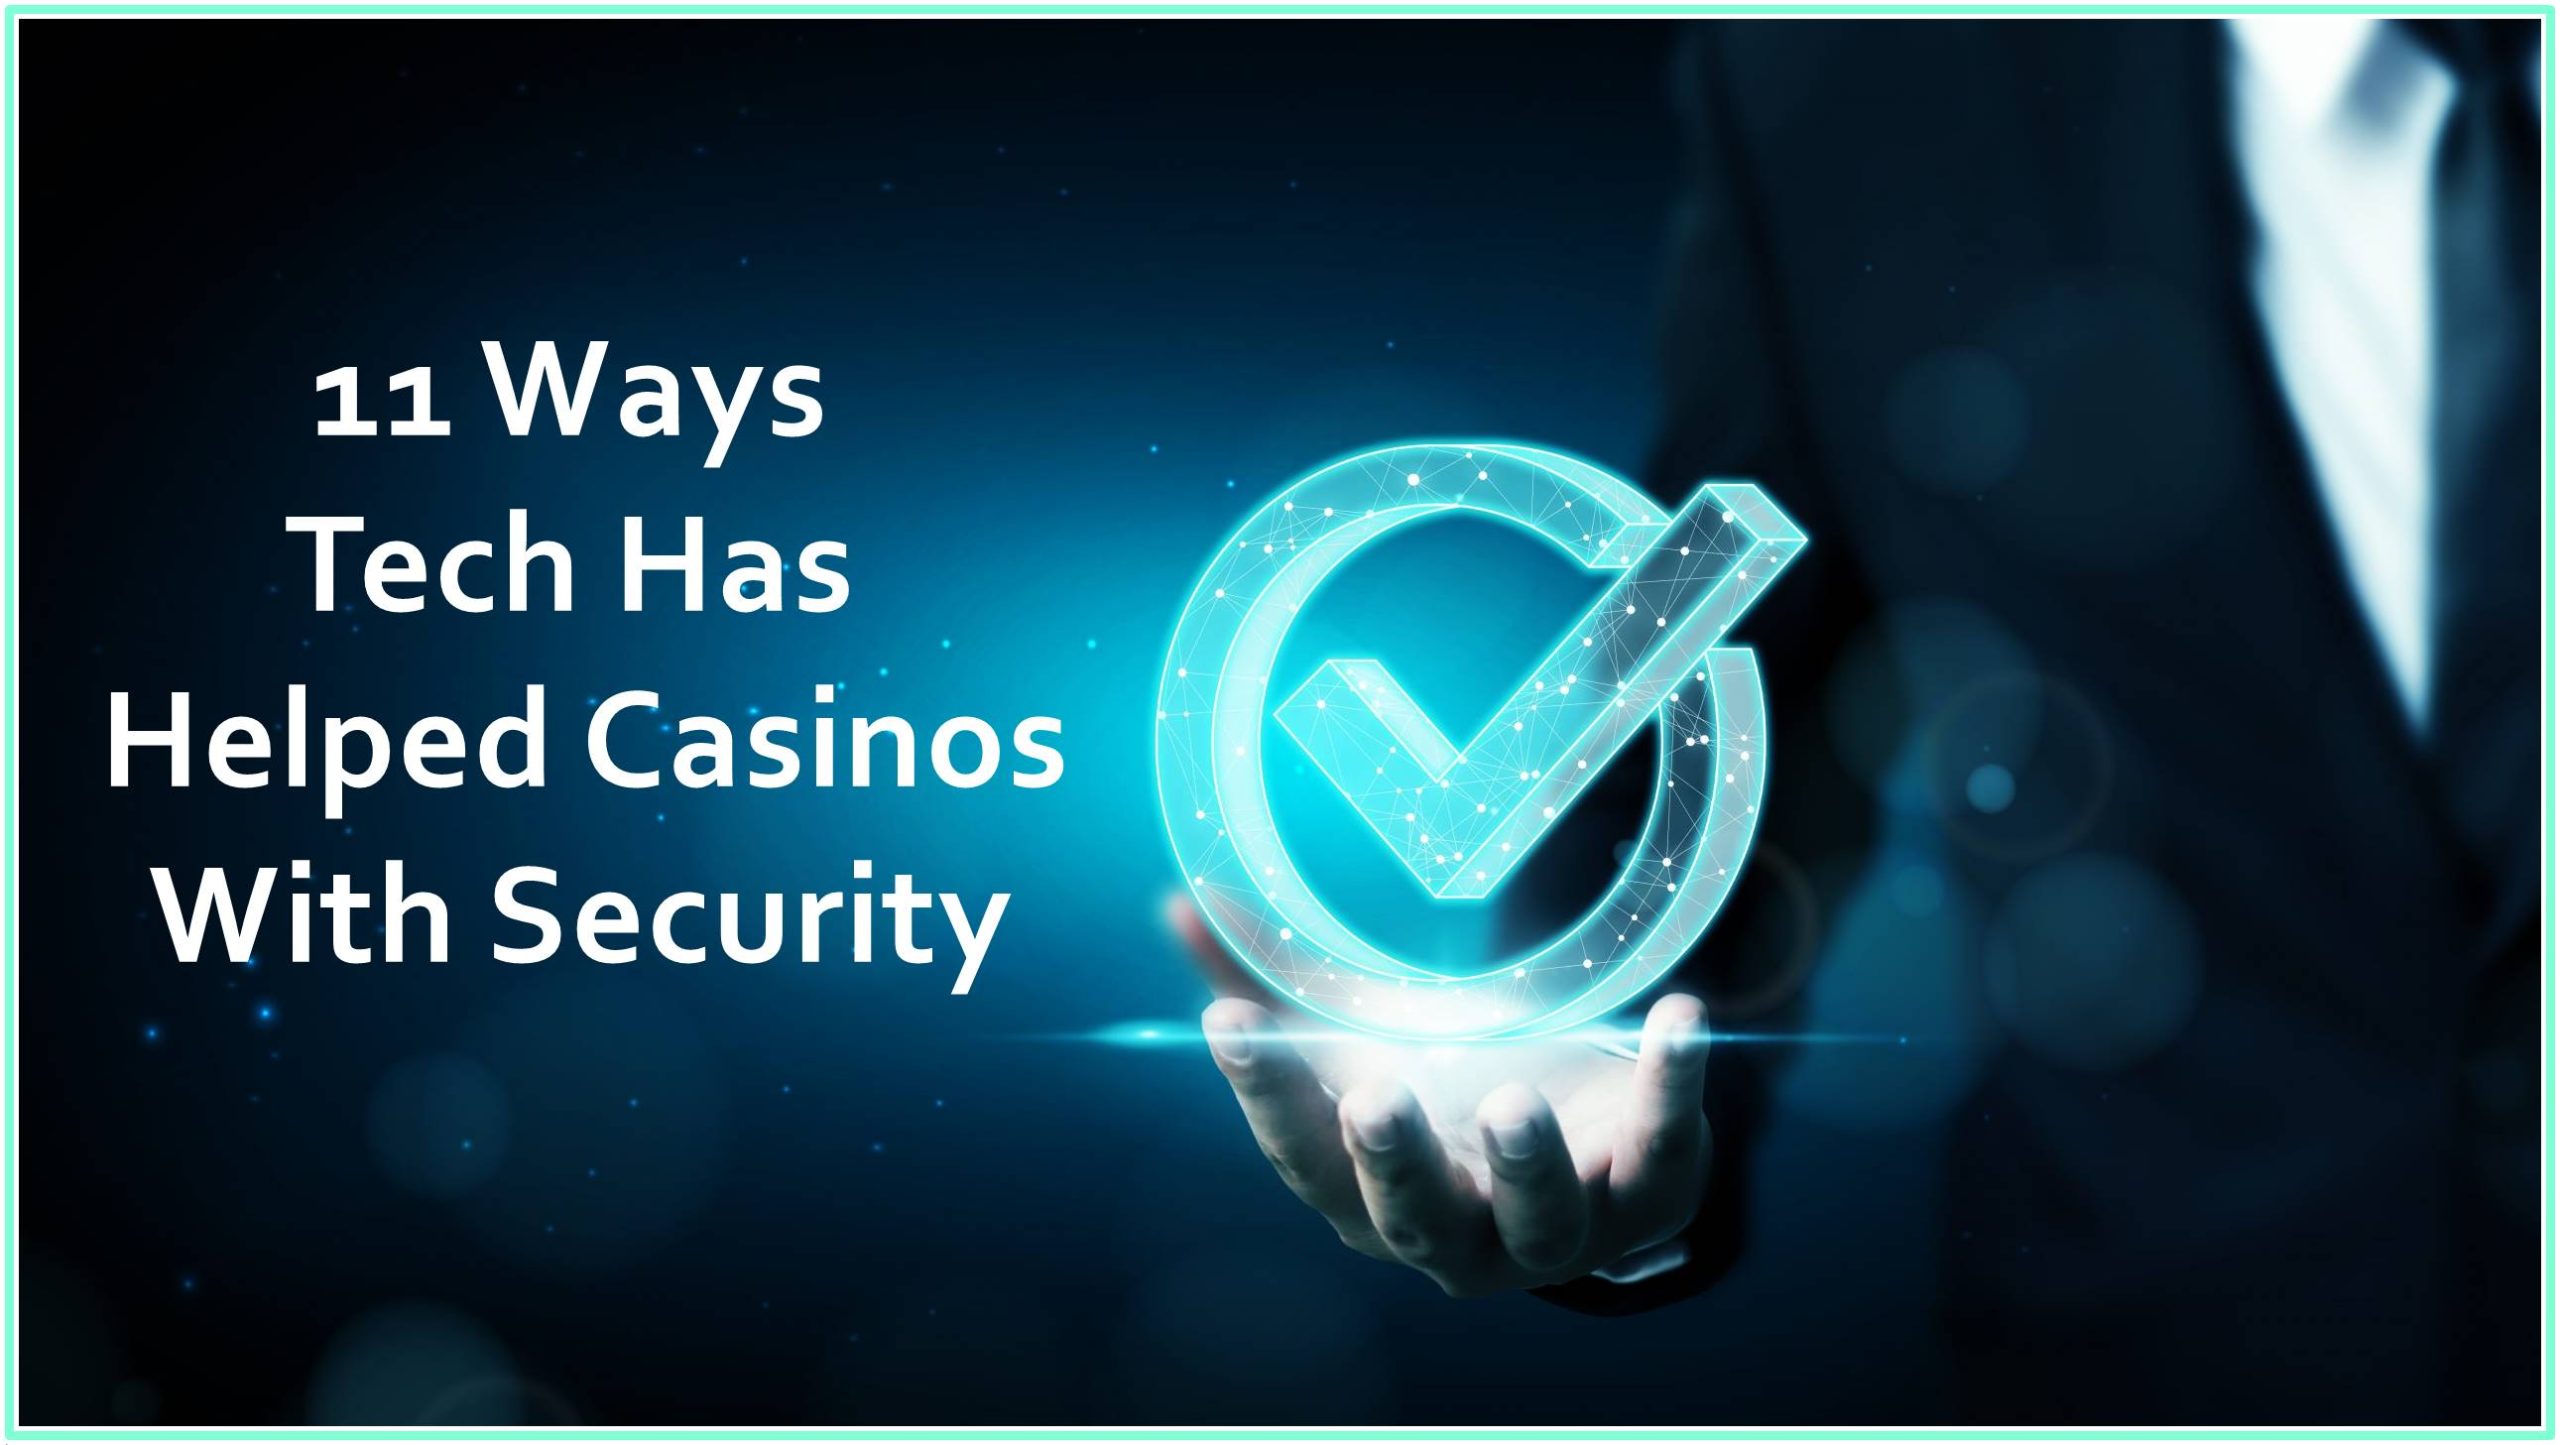 11 Ways Tech Has Helped Casinos With Security